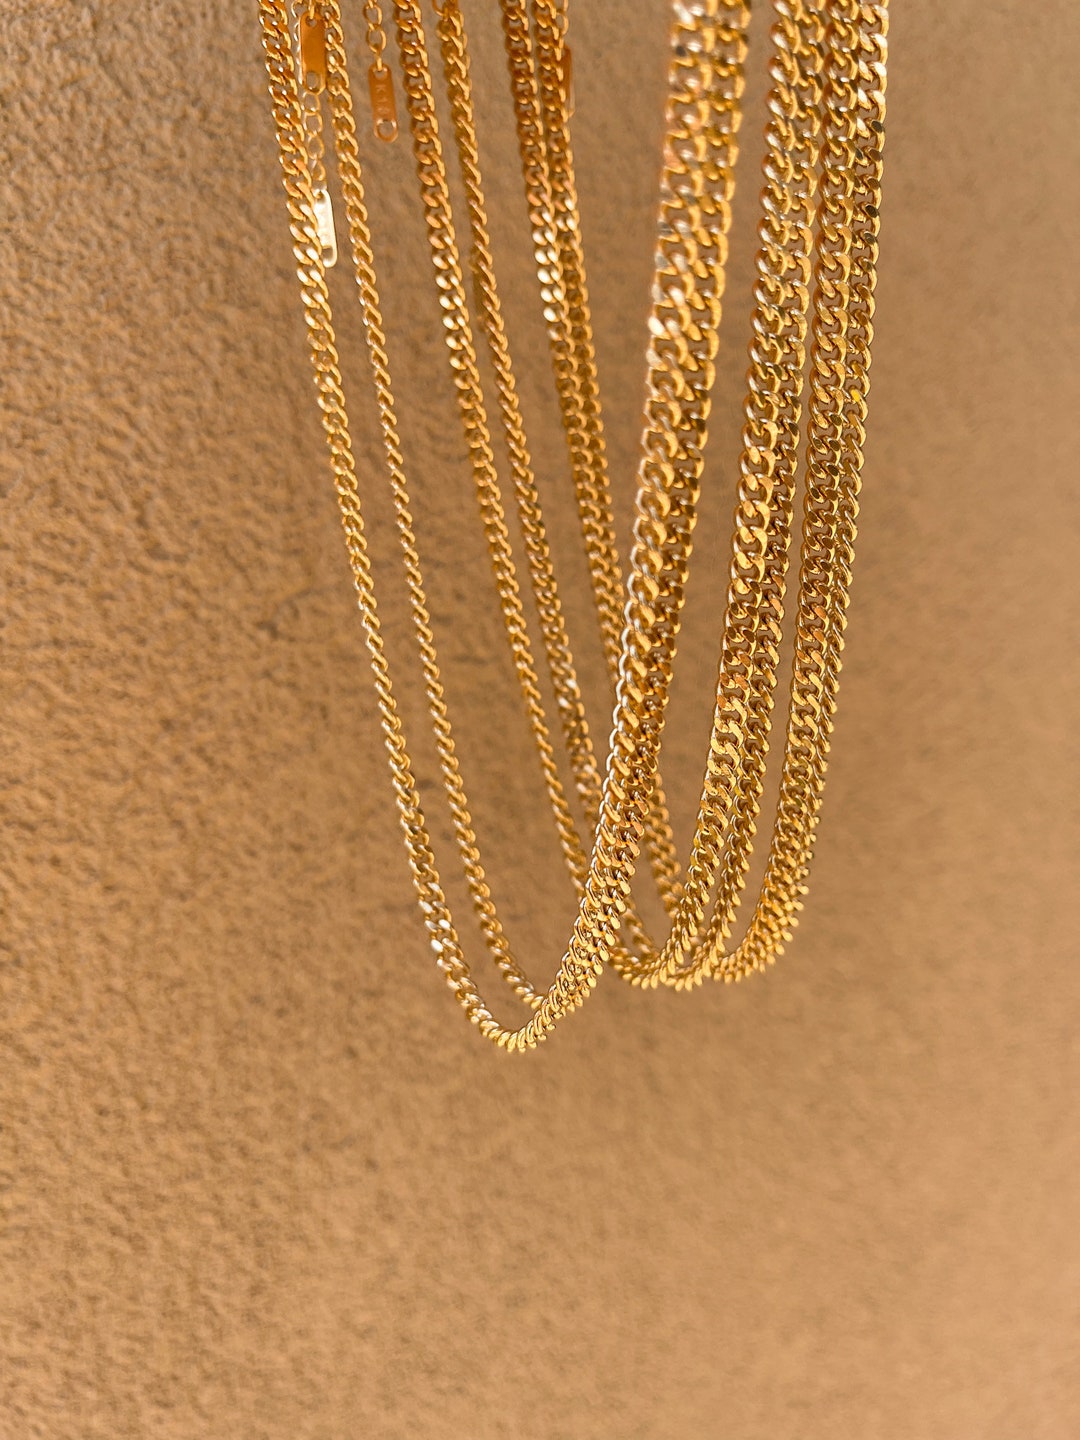 Chloe 18k Gold Plated Stainless Steel Cuban Link Chain - Etsy